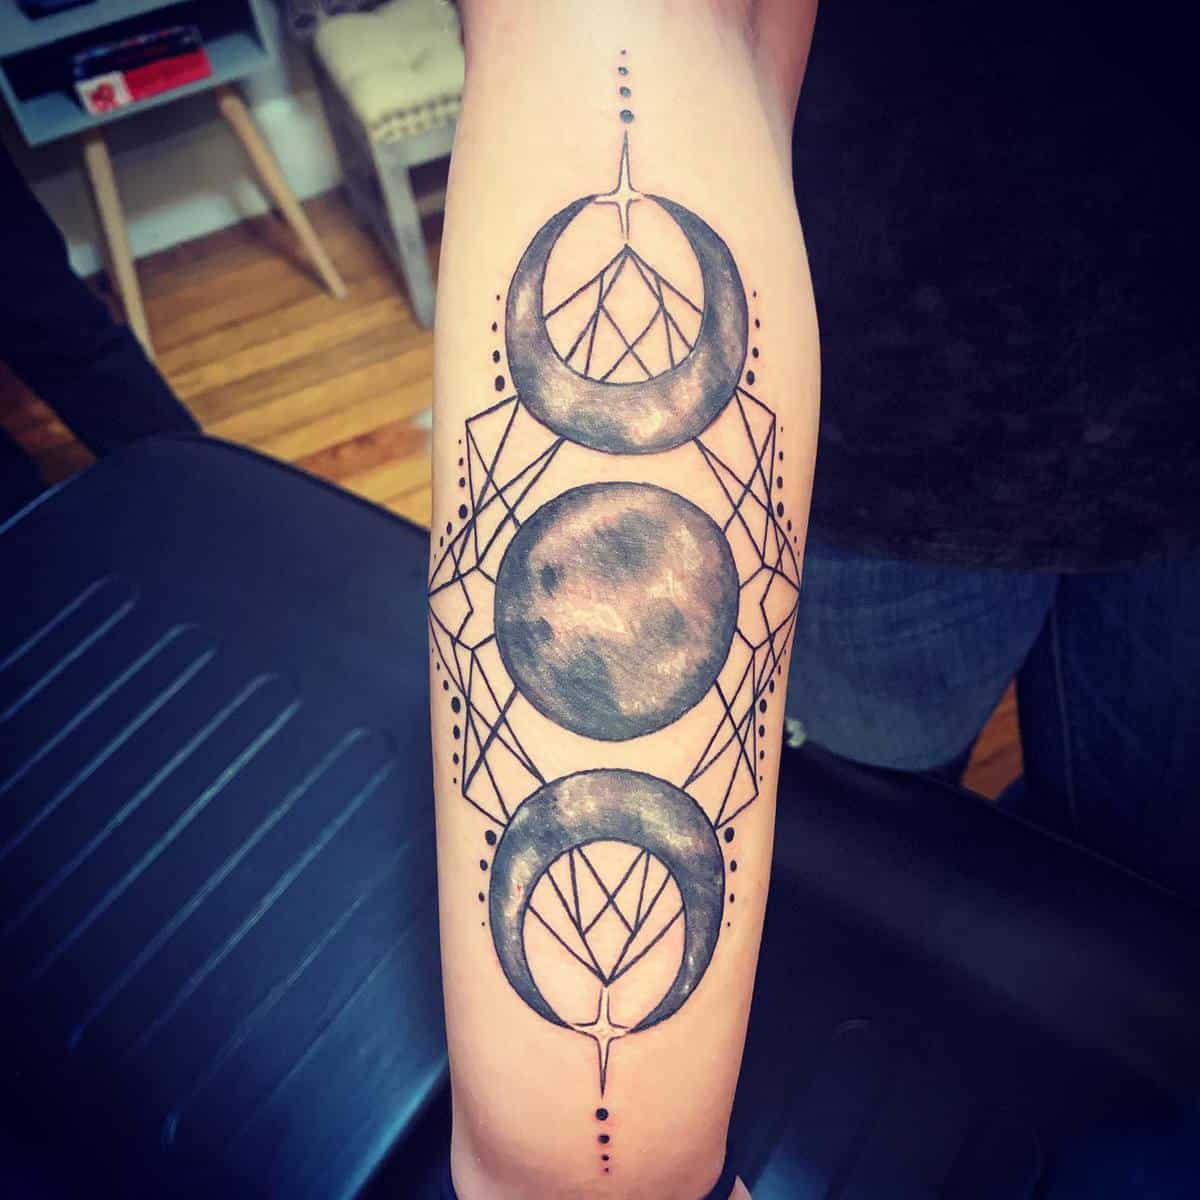 Moon Tattoo Meaning - What Do Different Moon Tattoo Ideas Symbolize?